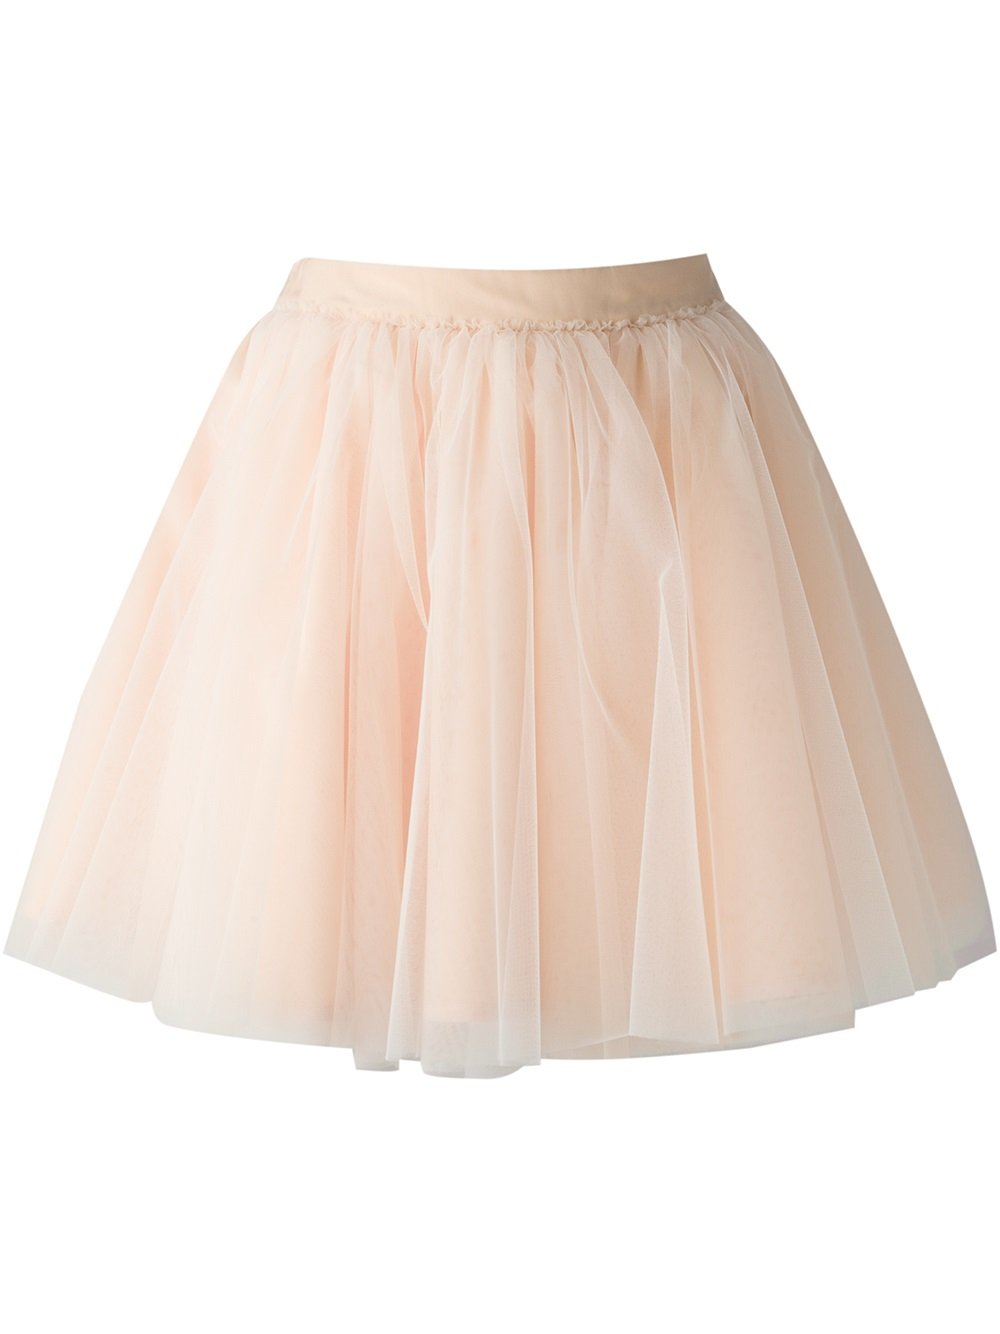 Lyst - Moschino Flared Tulle Skirt in Pink